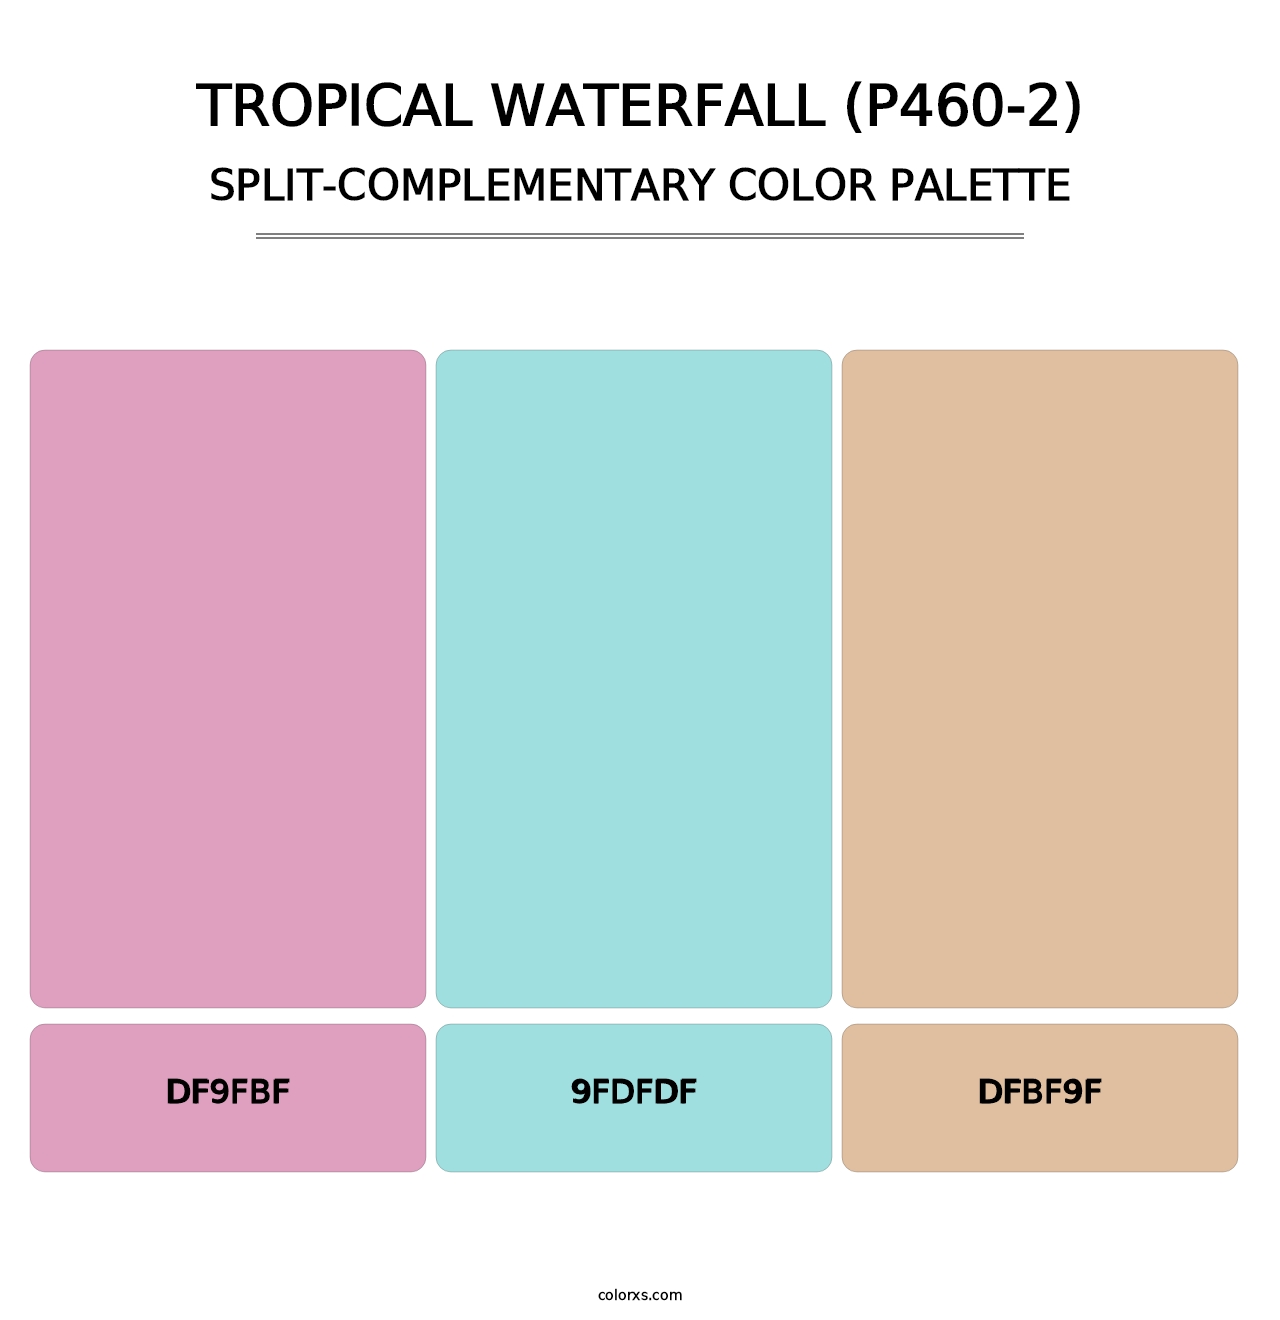 Tropical Waterfall (P460-2) - Split-Complementary Color Palette